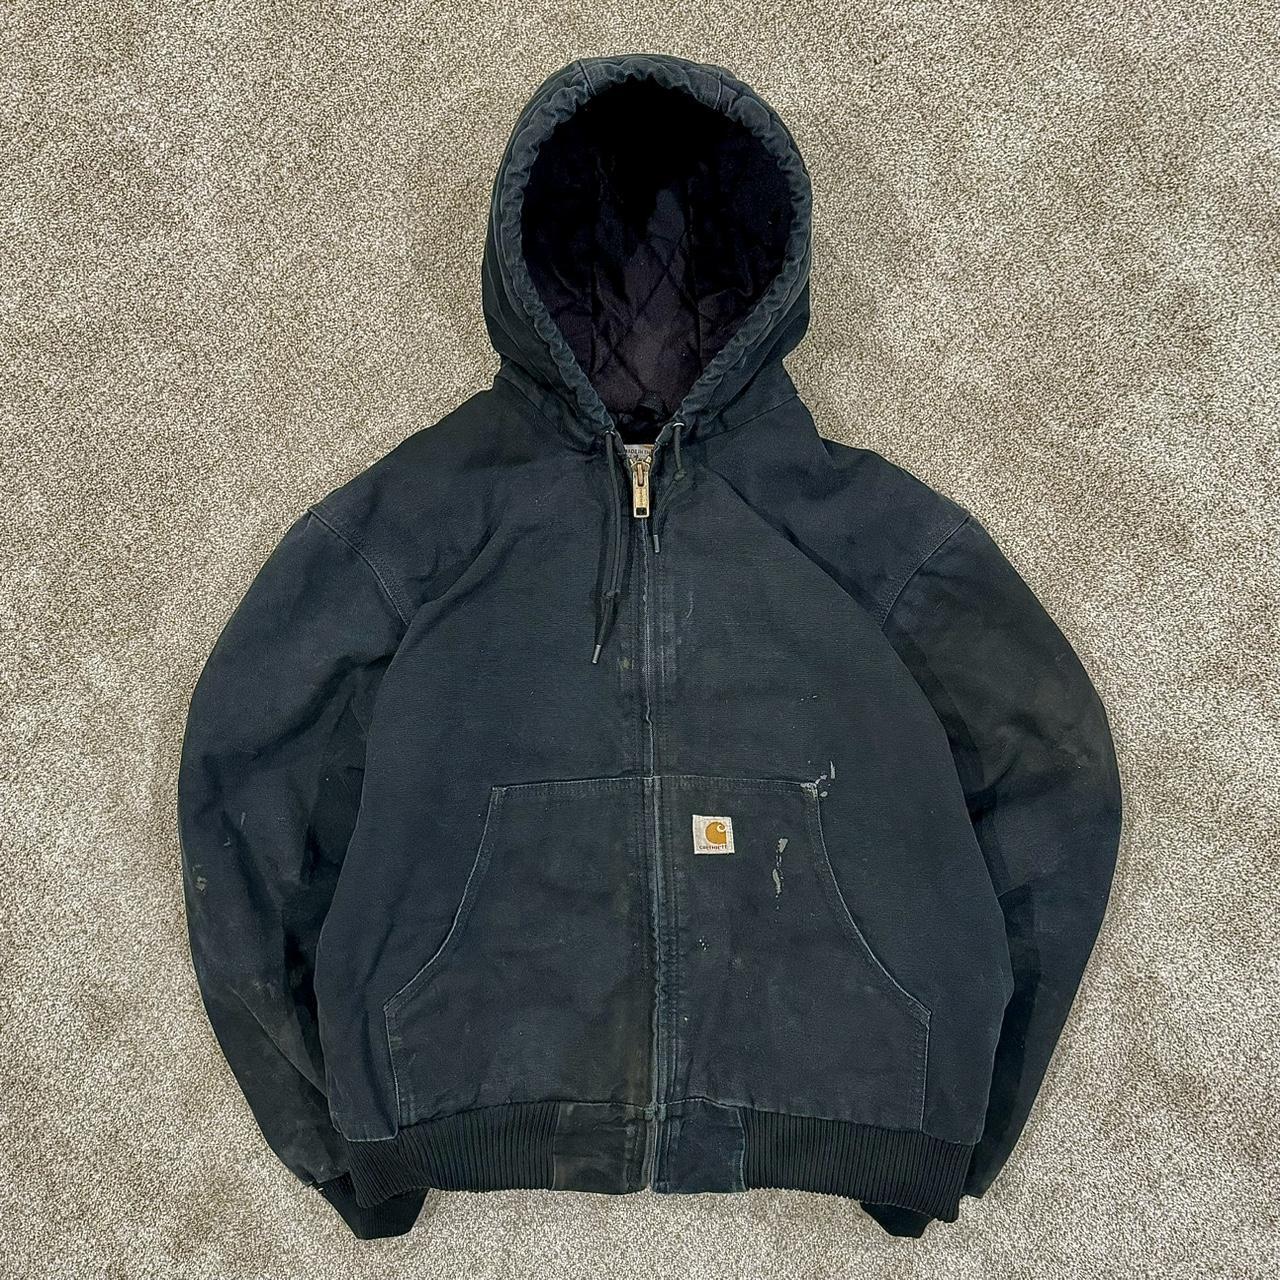 Vintage Faded Black Made in USA Union Labor Carhartt... - Depop